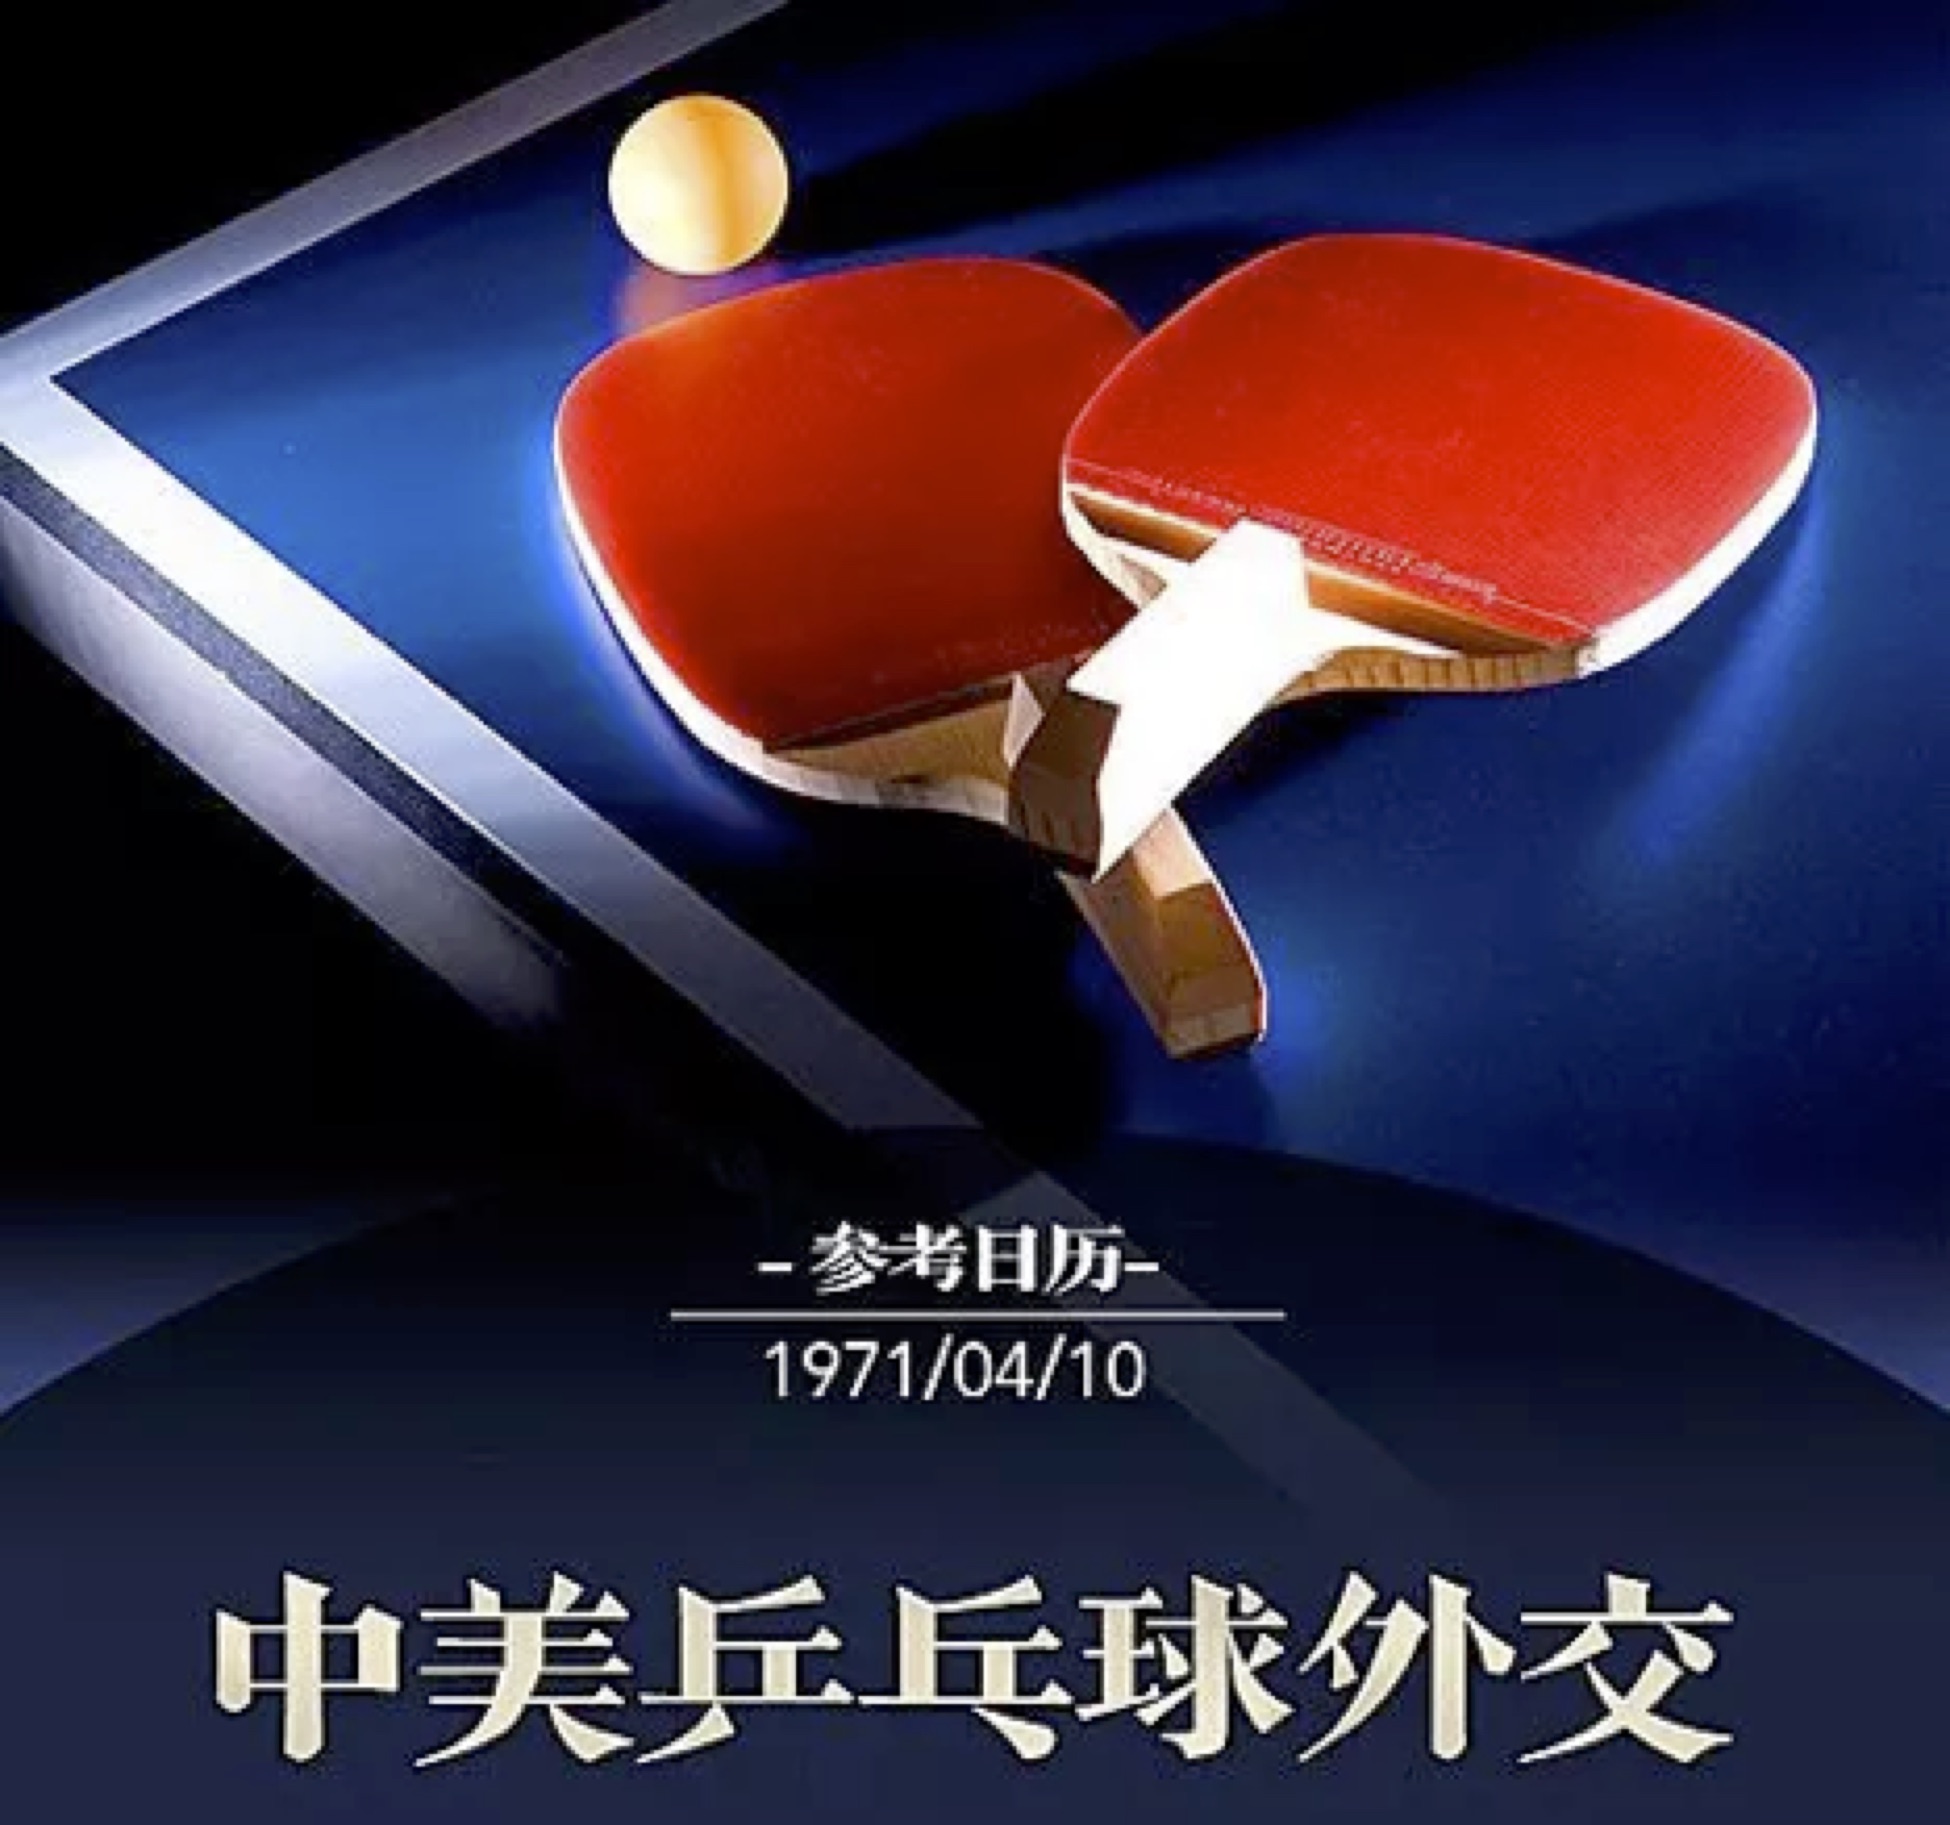 Ping-Pong Paddle - The National Museum of American Diplomacy